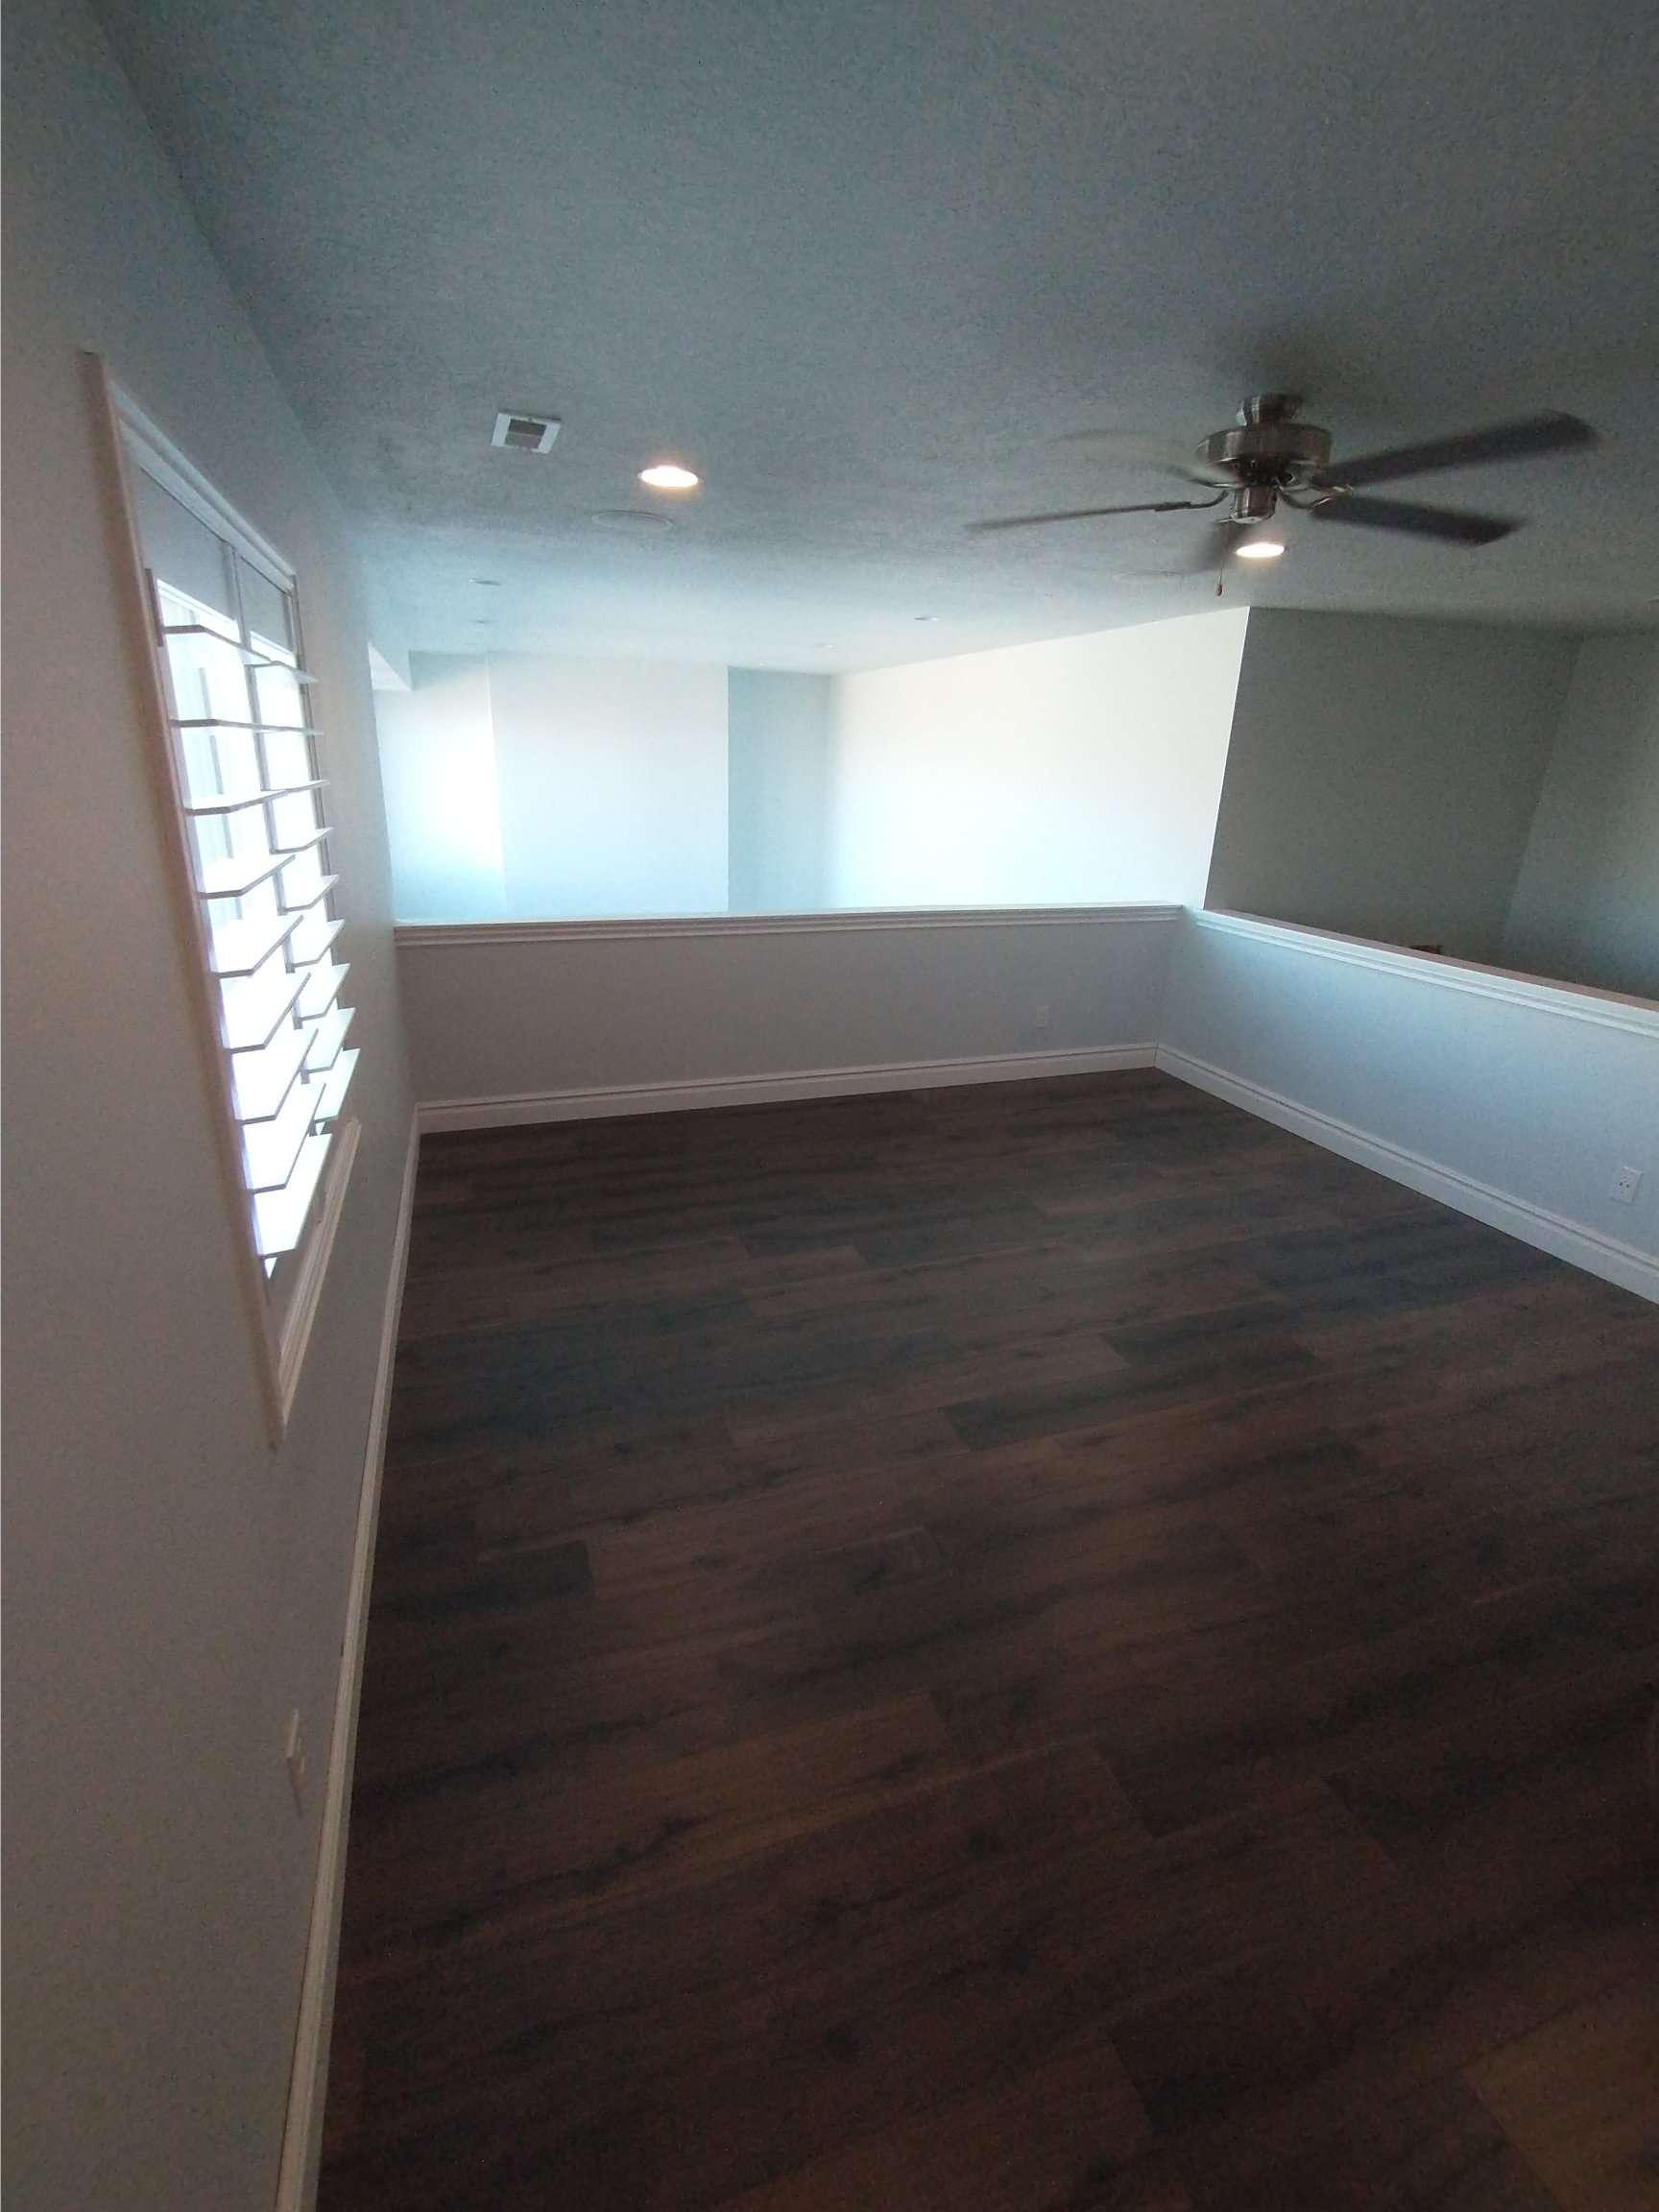 This looks great!! This project we did out in Tempe was a fun one! We installed about 1900 feet of this Laminate and love how it looks in this house. In this project we removed carpet and replaced it with Laminate. Call Home Solutionz Today For Your Flooring Project <(623) 289-3880>. Home Solutionz - Tempe is Licensed, Bonded, and Insured. Home Solutionz offers 12 - 24 Months 0% Financing Through Wells Fargo. Home Solutionz Tempe - 3125 S 52nd St, Suite 107 Tempe, AZ 85282 United States  Laminate  FloorInstallation  Flooring